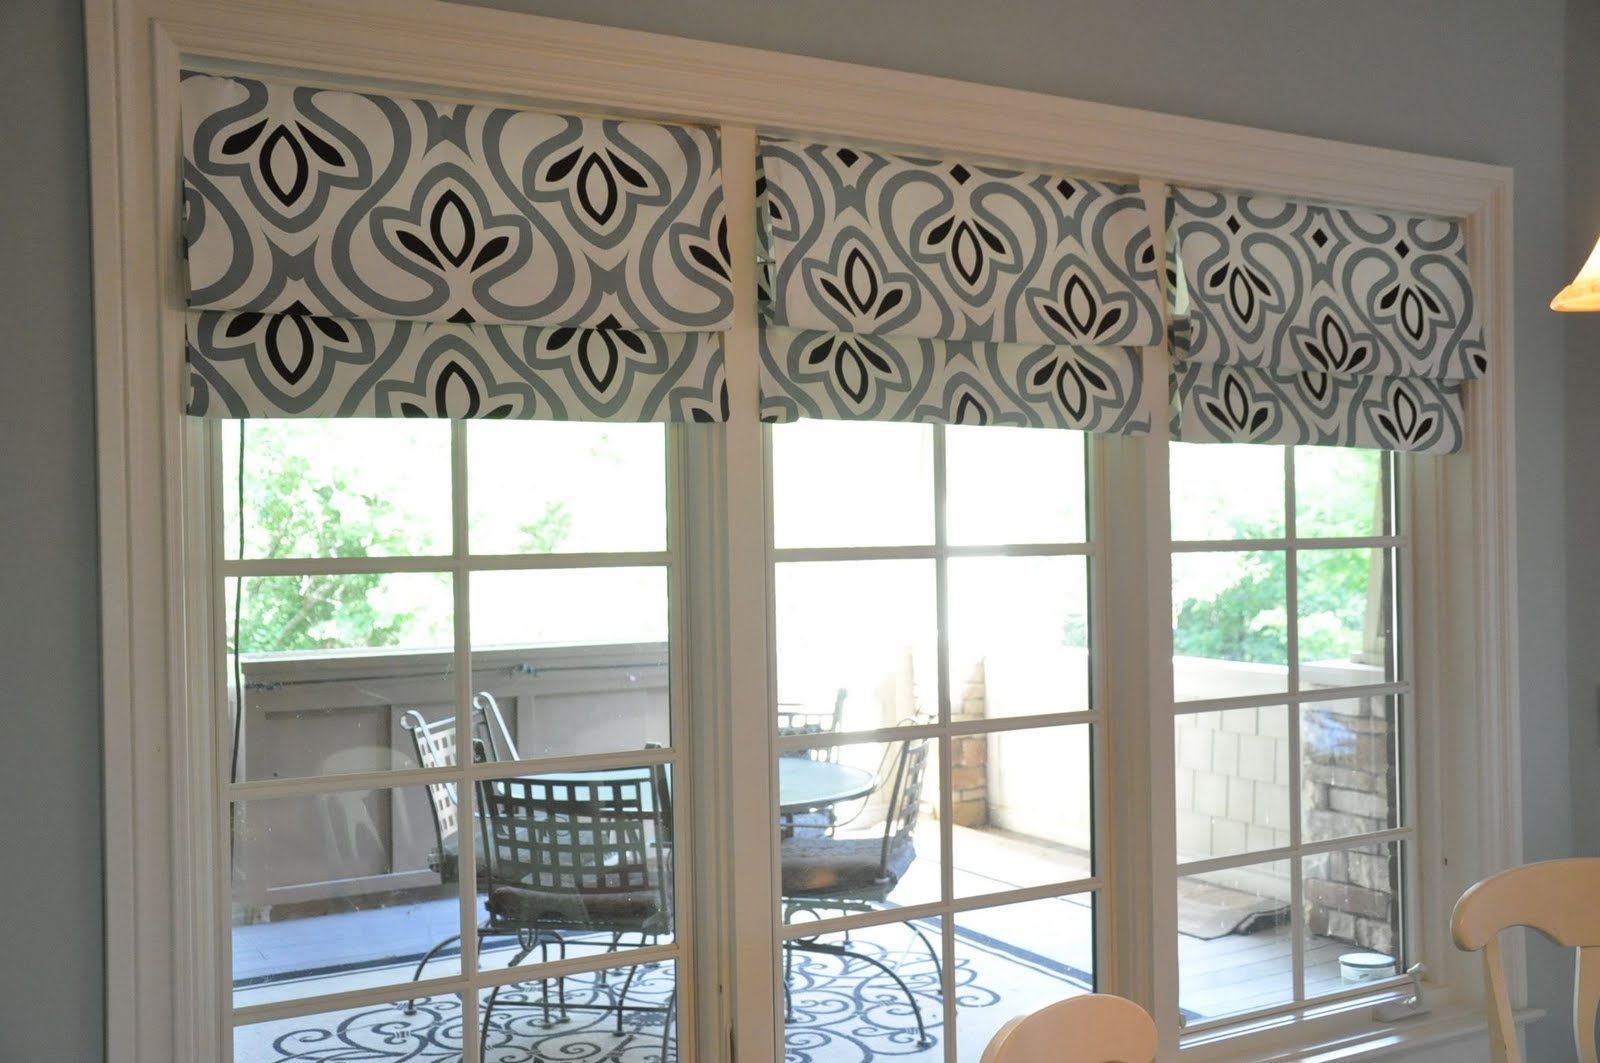 How To Make No-Sew Roman Blinds